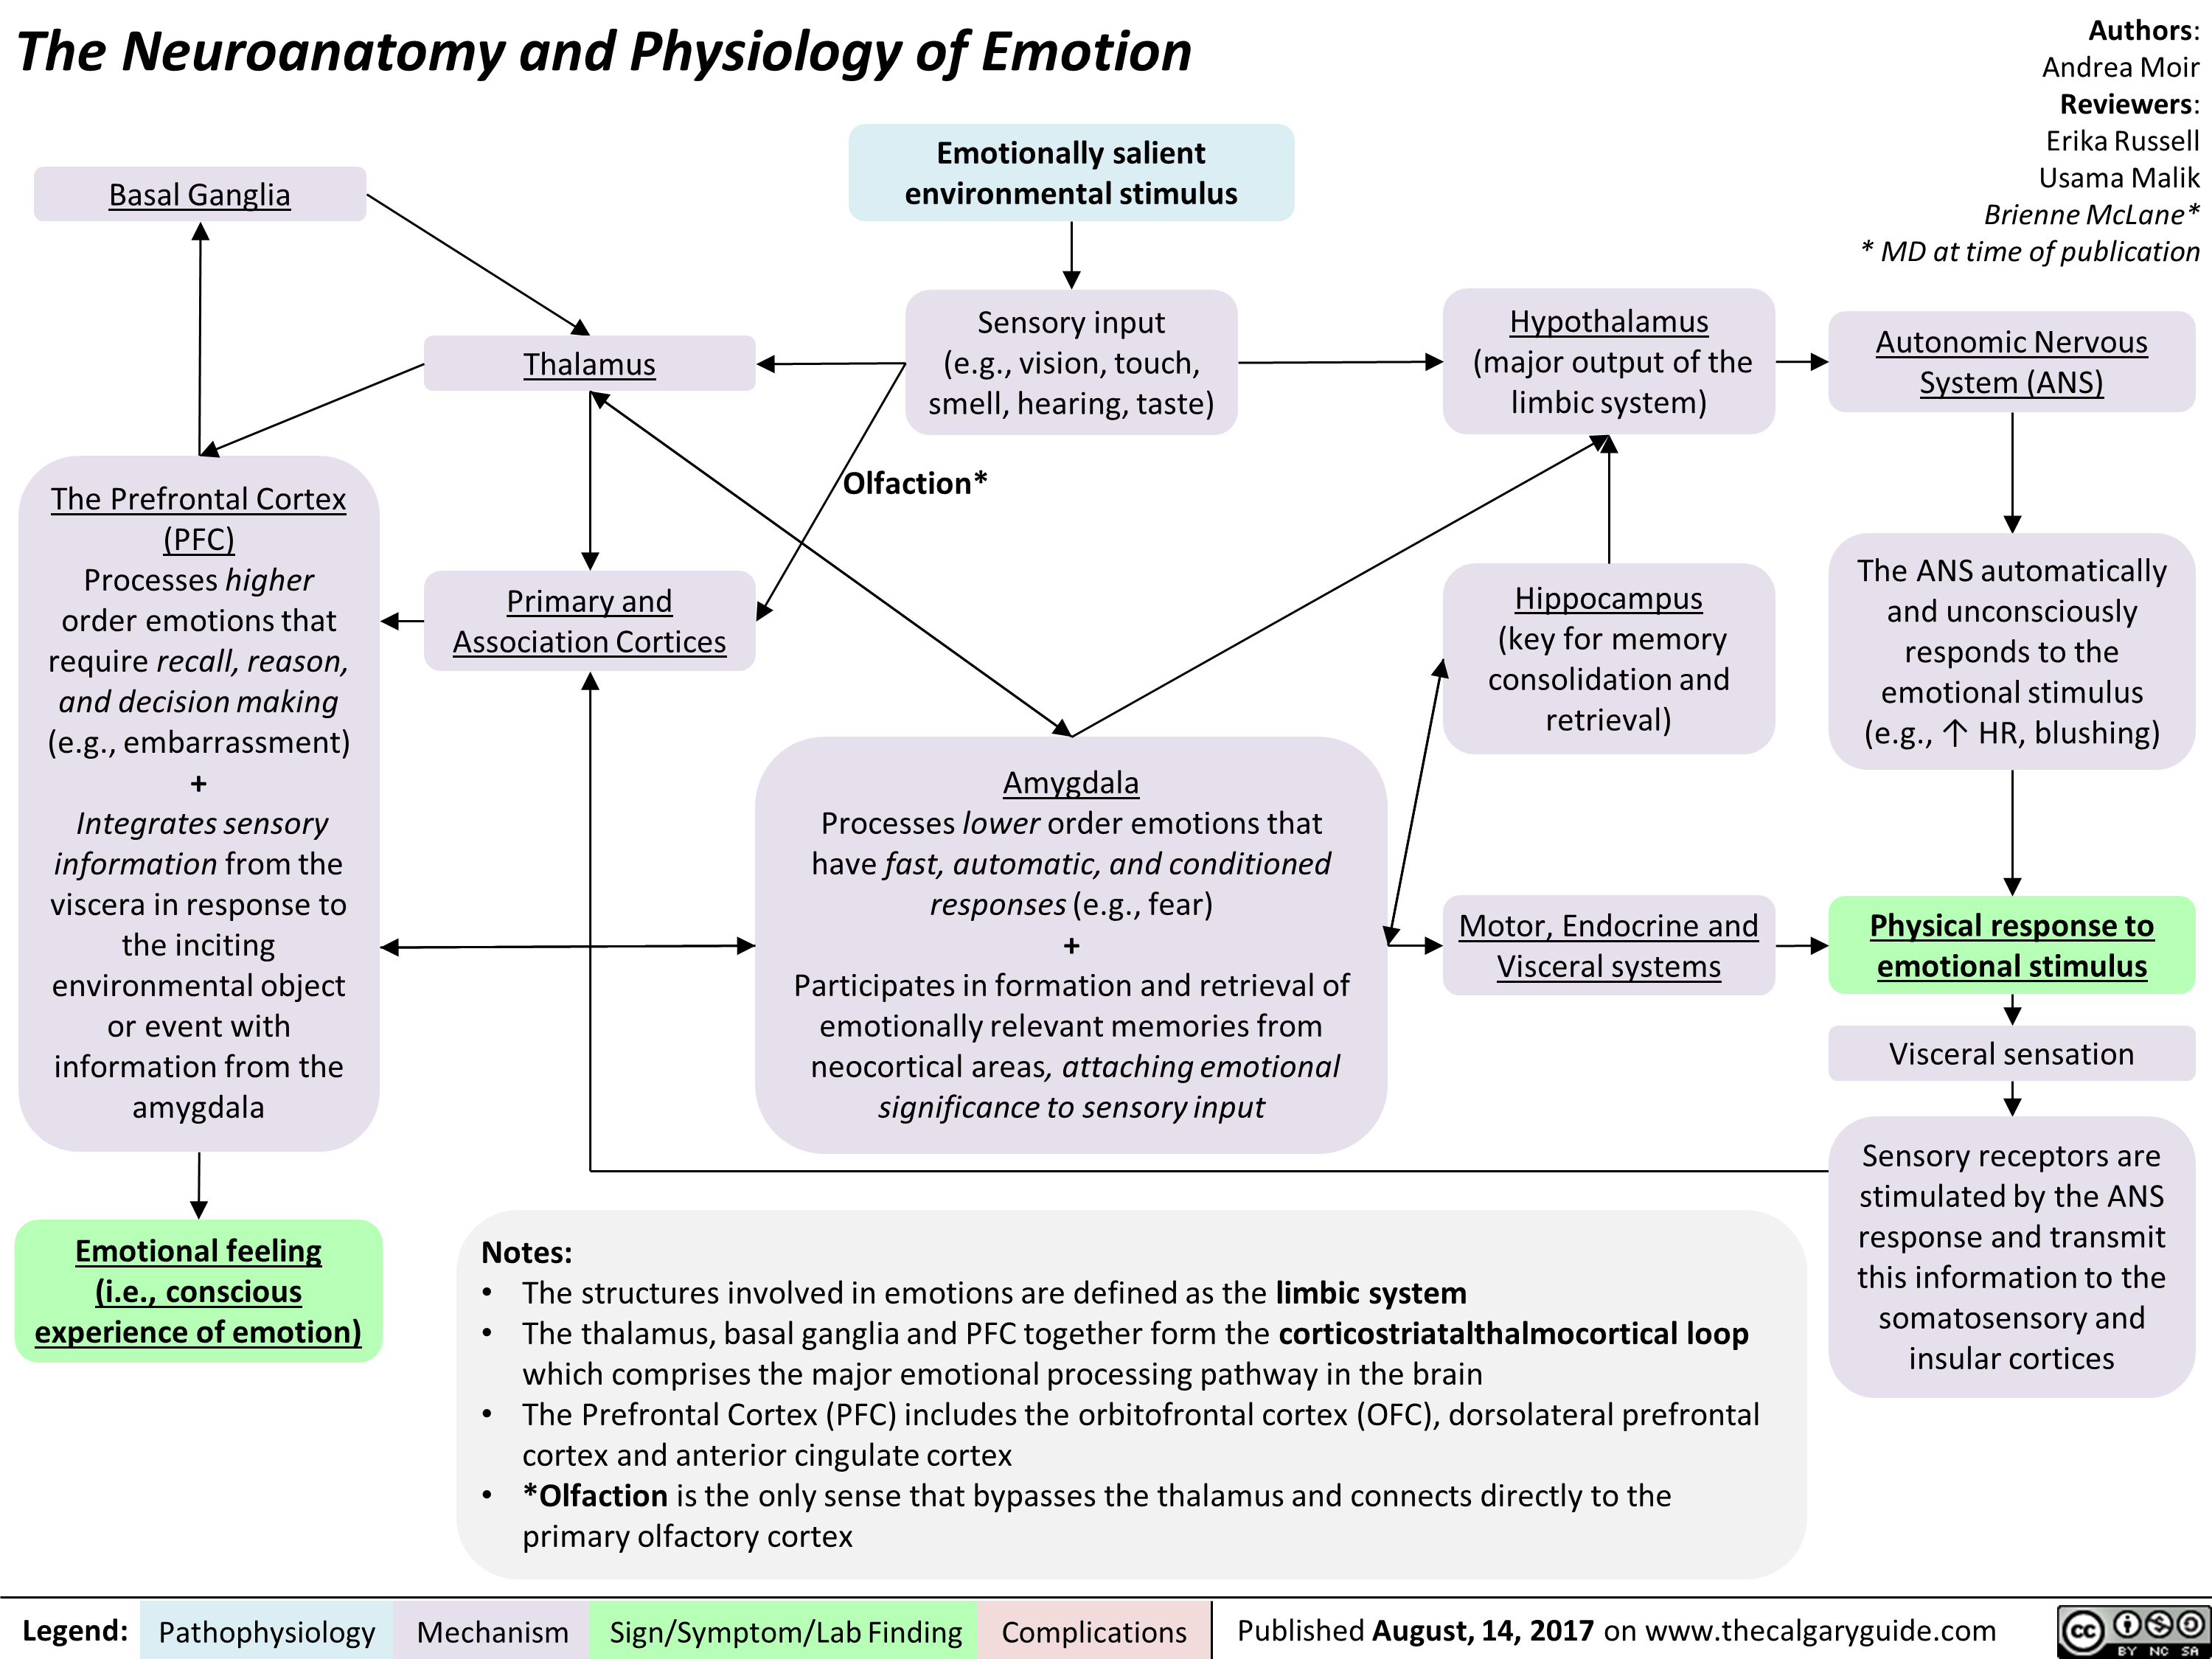 The Neuroanatomy and Physiology of Emotion 
Basal Ganglia • 
The Prefrontal Cortex  (PFC)  Processes higher order emotions that 1— require recall, reason, and decision making (e.g., embarrassment) Integrates sensory information from the viscera in response to the inciting •  
environmental object or event with information from the amygdala 
Emotional feeling  (i.e., conscious  experience of emotion) 
Thalamus 
Emotionally salient environmental stimulus 

Sensory input (e.g., vision, touch, smell, hearing, taste) 
Hypothalamus   ► (major output of the limbic system) 
Olfaction* 

Primary and  Association Cortices • 
Amygdala  Processes lower order emotions that have fast, automatic, and conditioned responses (e.g., fear) Participates in formation and retrieval of emotionally relevant memories from neocortical areas, attaching emotional significance to sensory input 
Hippocampus  (key for memory consolidation and retrieval) 
► Motor, Endocrine and Visceral systems 
Notes: • The structures involved in emotions are defined as the limbic system • The thalamus, basal ganglia and PFC together form the corticostriatalthalmocortical loop which comprises the major emotional processing pathway in the brain • The Prefrontal Cortex (PFC) includes the orbitofrontal cortex (OFC), dorsolateral prefrontal cortex and anterior cingulate cortex • *Olfaction is the only sense that bypasses the thalamus and connects directly to the primary olfactory cortex 
Legend: Pathophysiology Mechanism 
Sign/Symptom/Lab Finding 
Authors: Andrea Moir Reviewers: Erika Russell Usama Malik Brienne McLane* * MD at time of publication 
Autonomic Nervous System (ANS)  
The ANS automatically and unconsciously responds to the emotional stimulus (e.g., 11` HR, blushing) 
Physical response to emotional stimulus  Visceral sensation 
Sensory receptors are stimulated by the ANS response and transmit this information to the somatosensory and insular cortices 